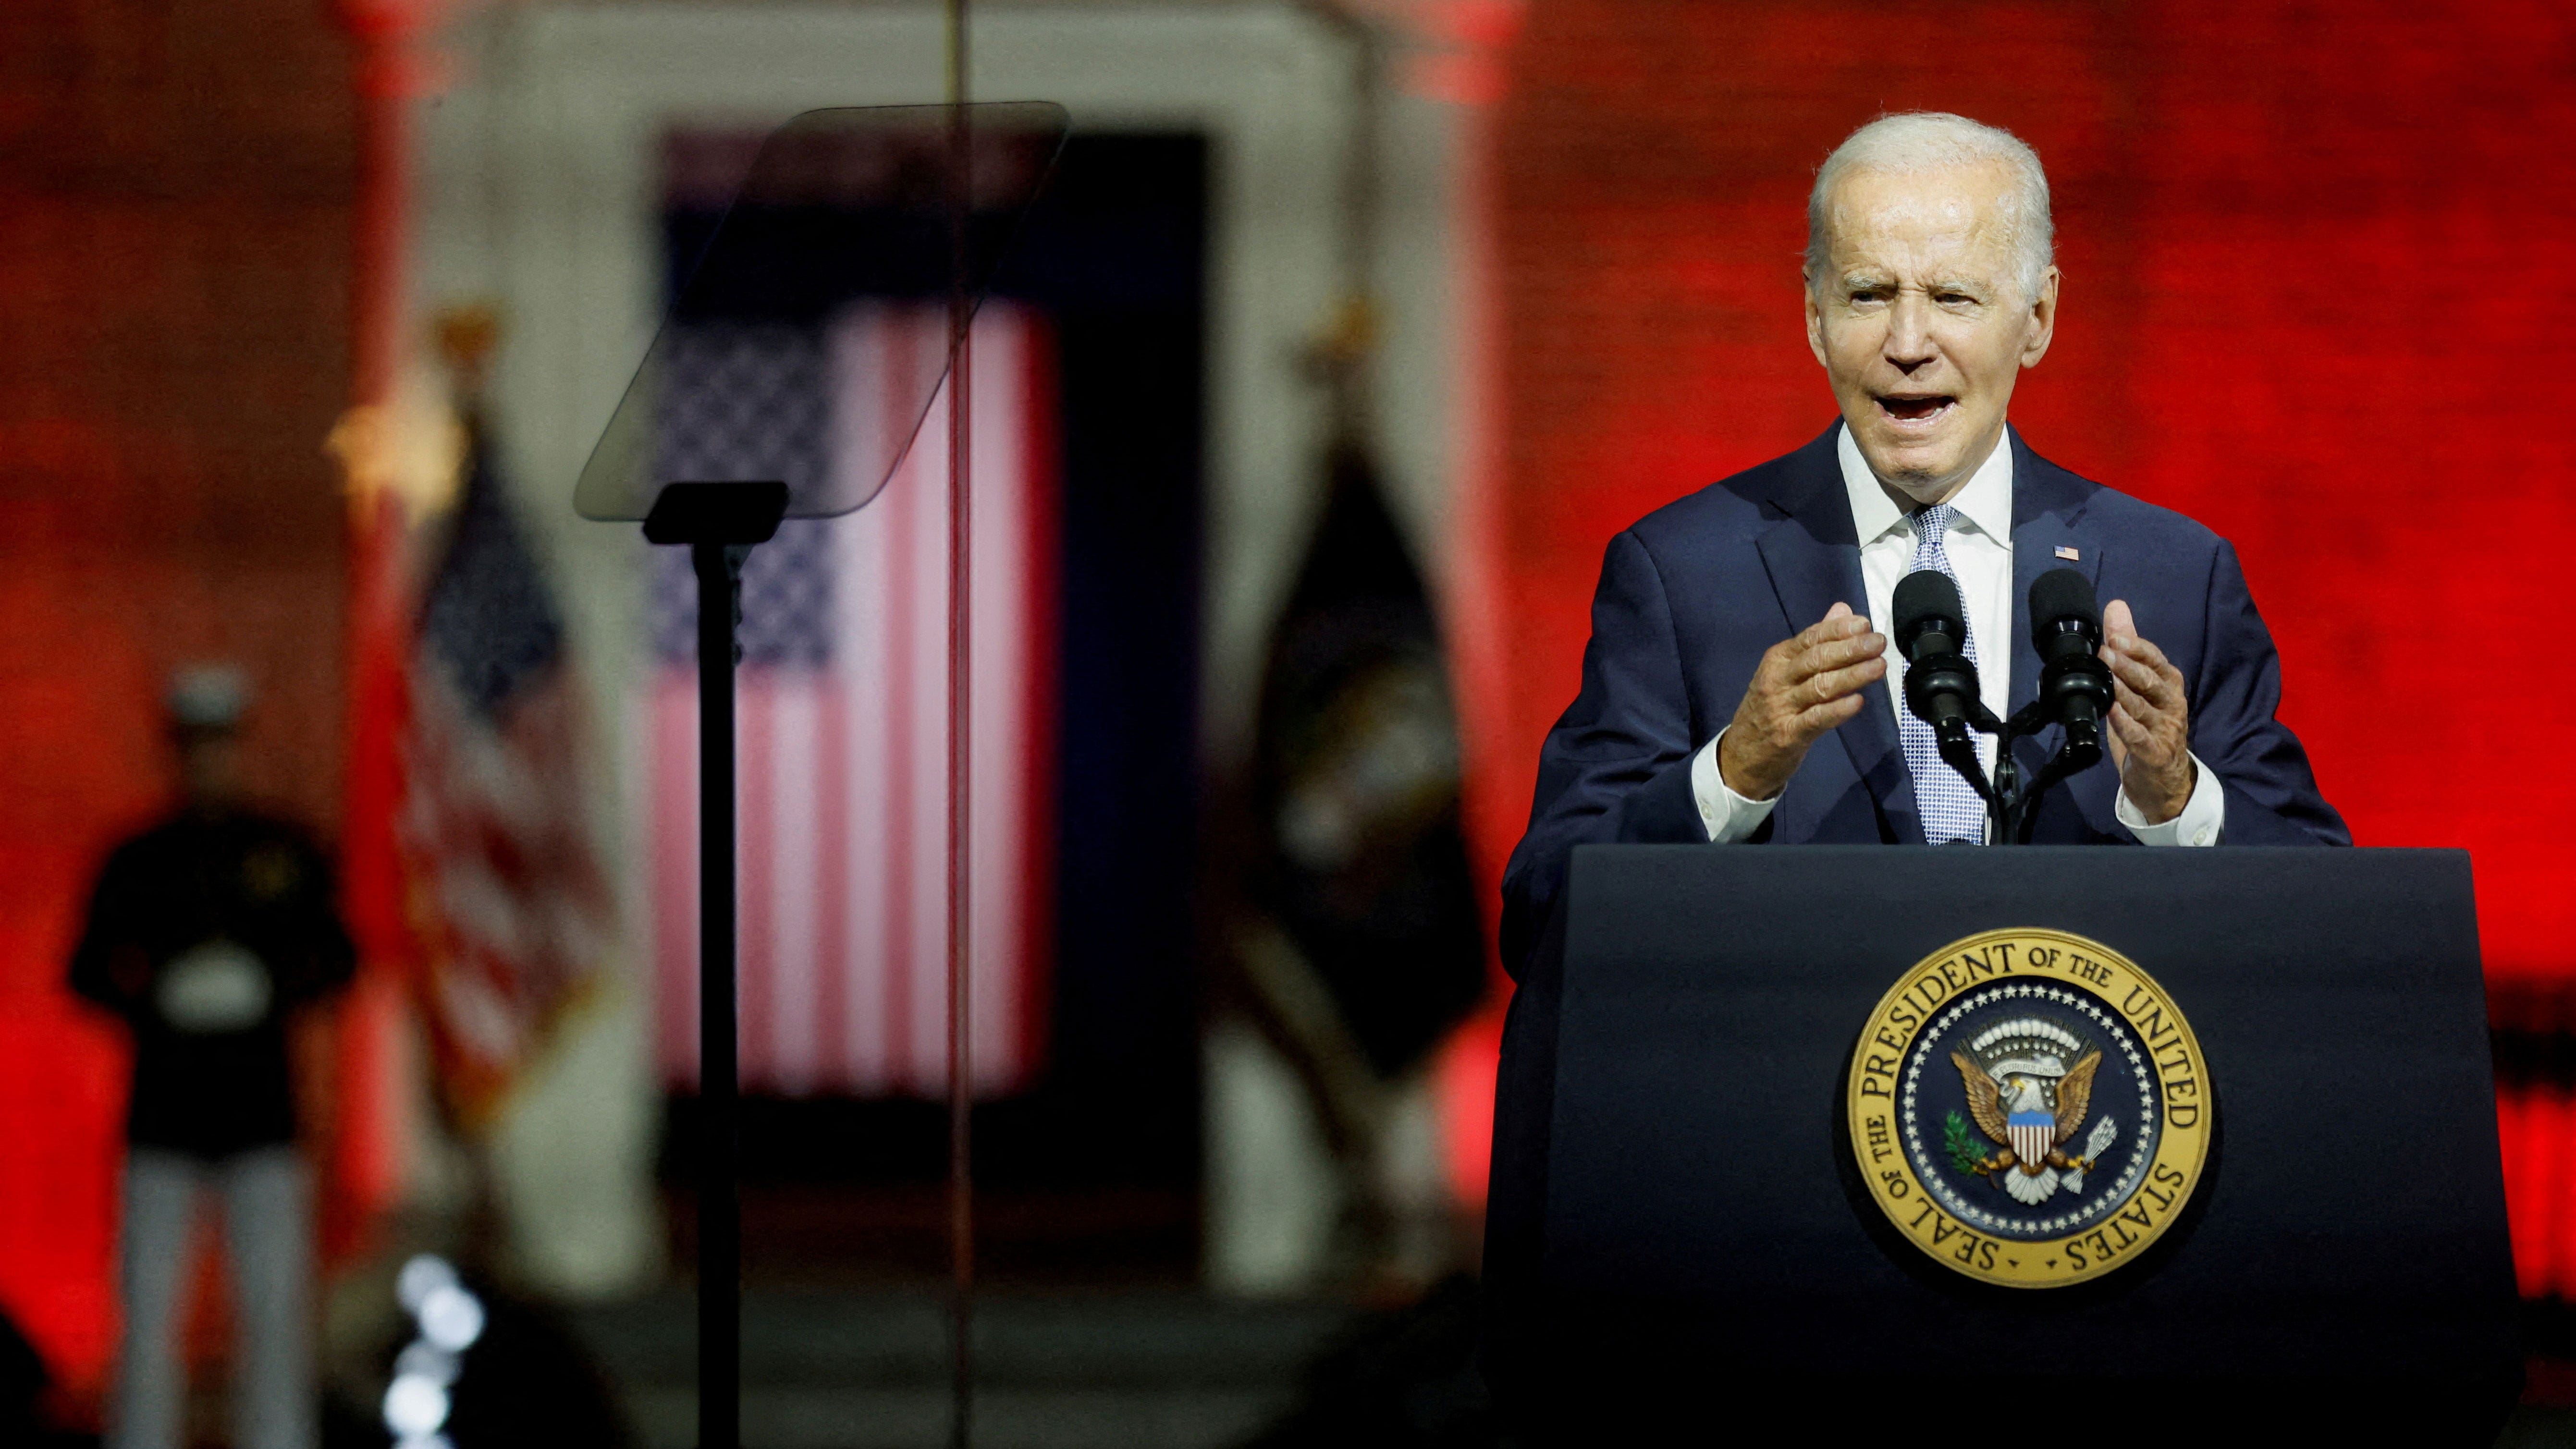 Political commentators, media hosts give Biden's campaign style speech mixed reviews: 'Divisive by nature'